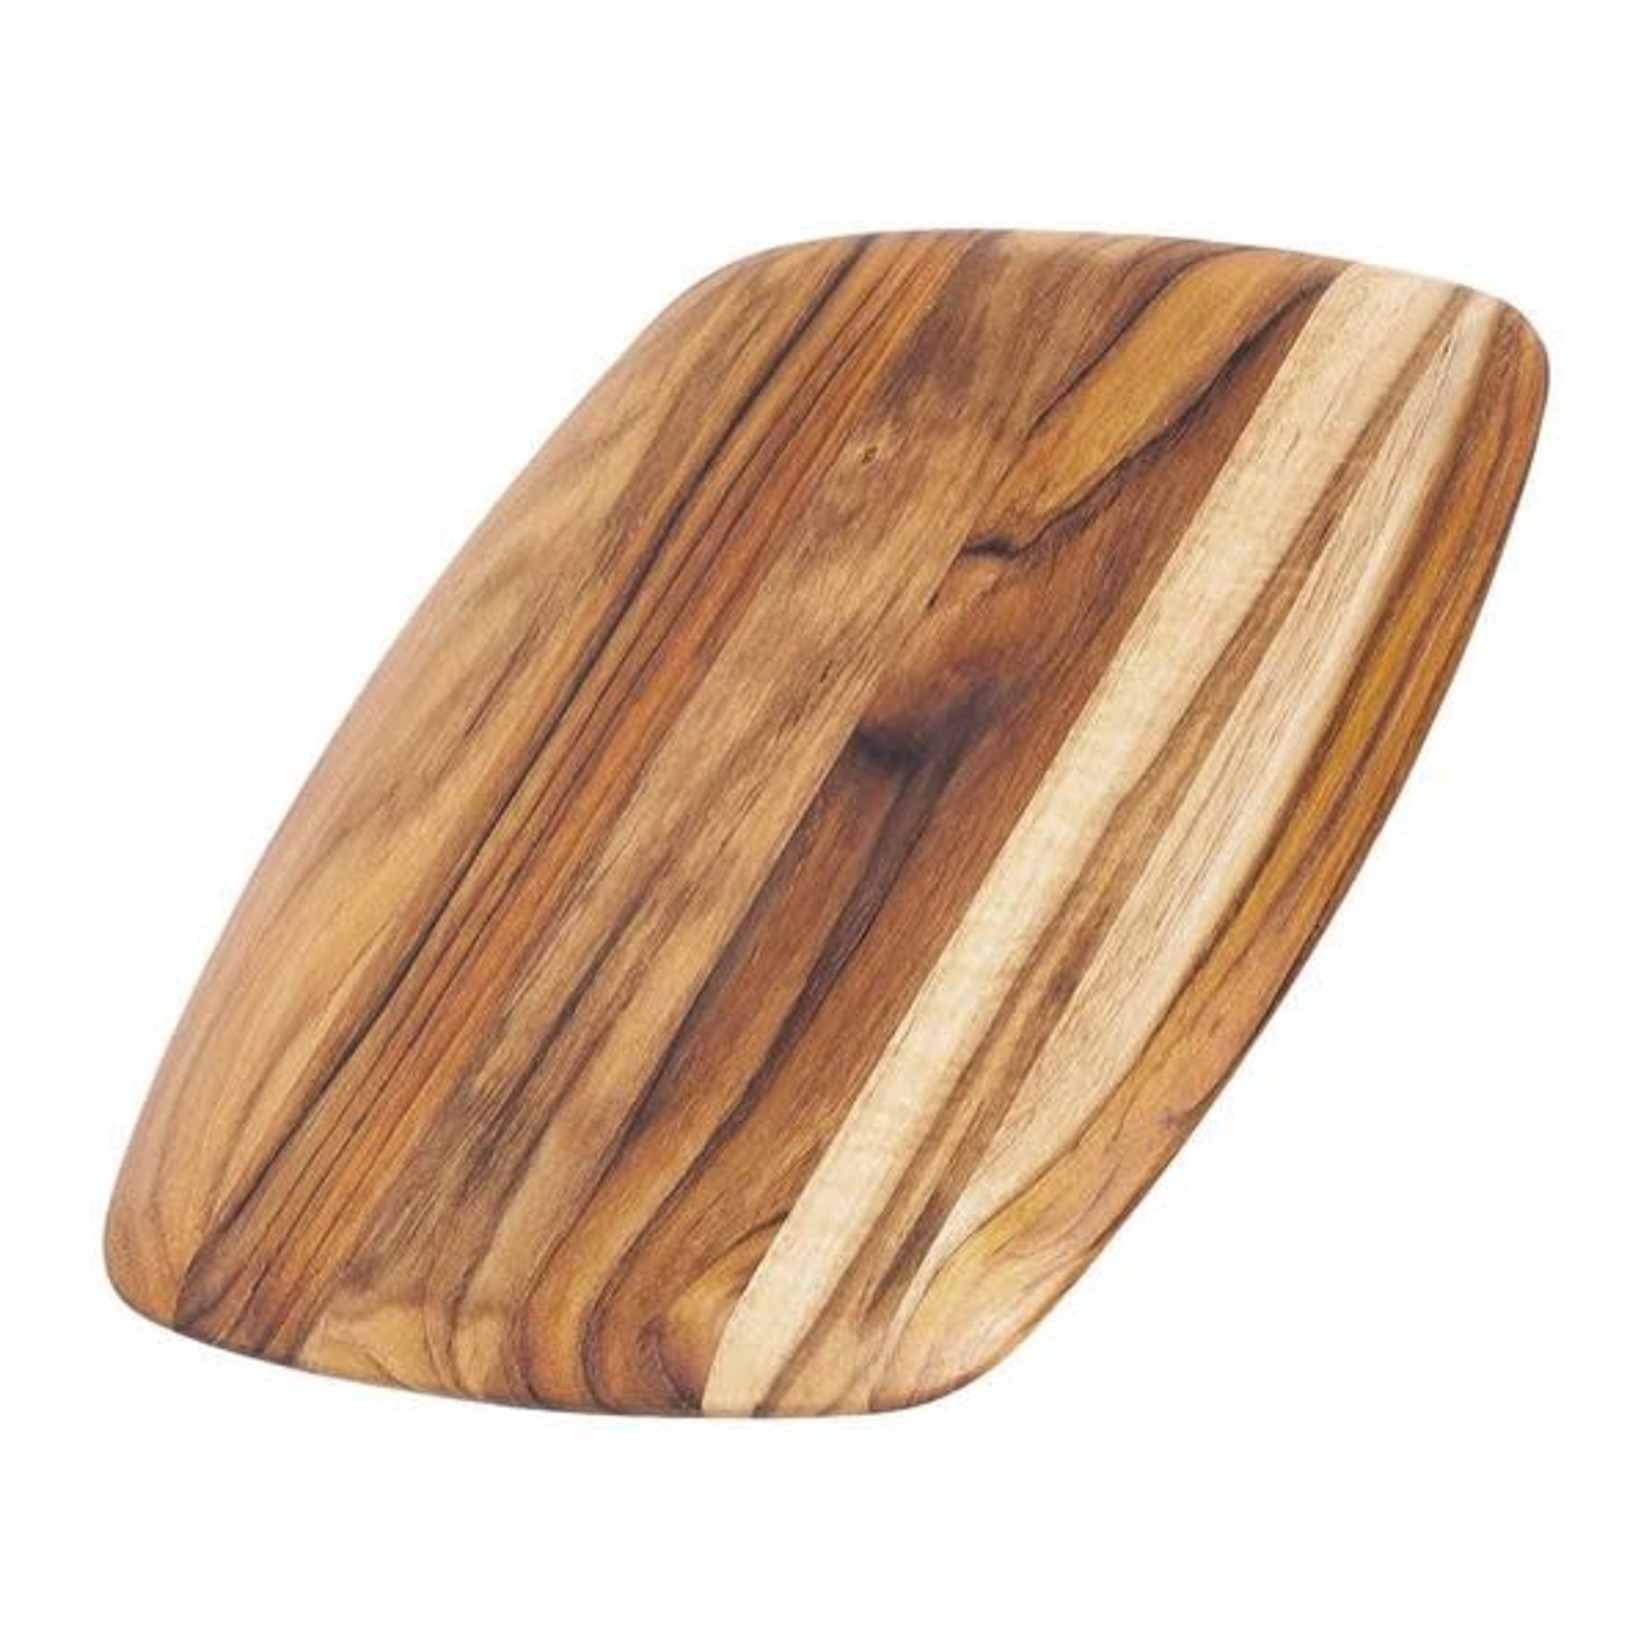 TEAKHAUS TEAKHAUS Rounded Edge Cutting / Serving Board 12x8"